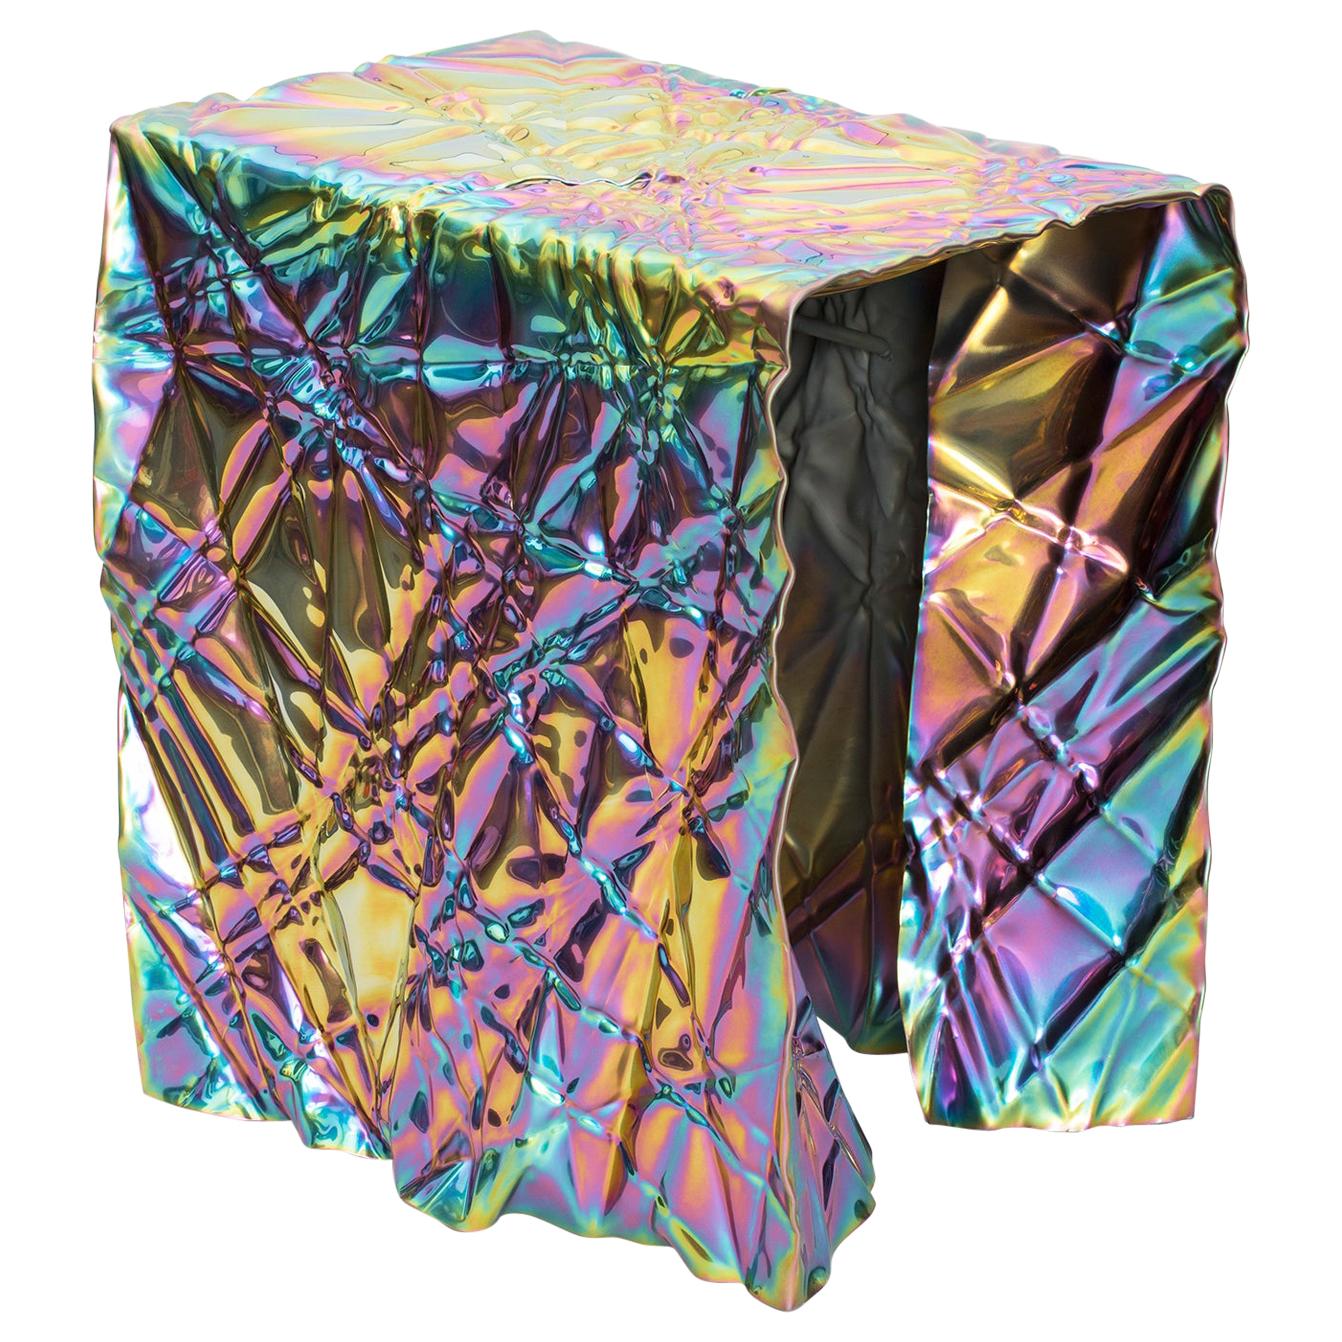 Christopher Prinz "Wrinkled Stool" in Rainbow Iridescent (Polished)